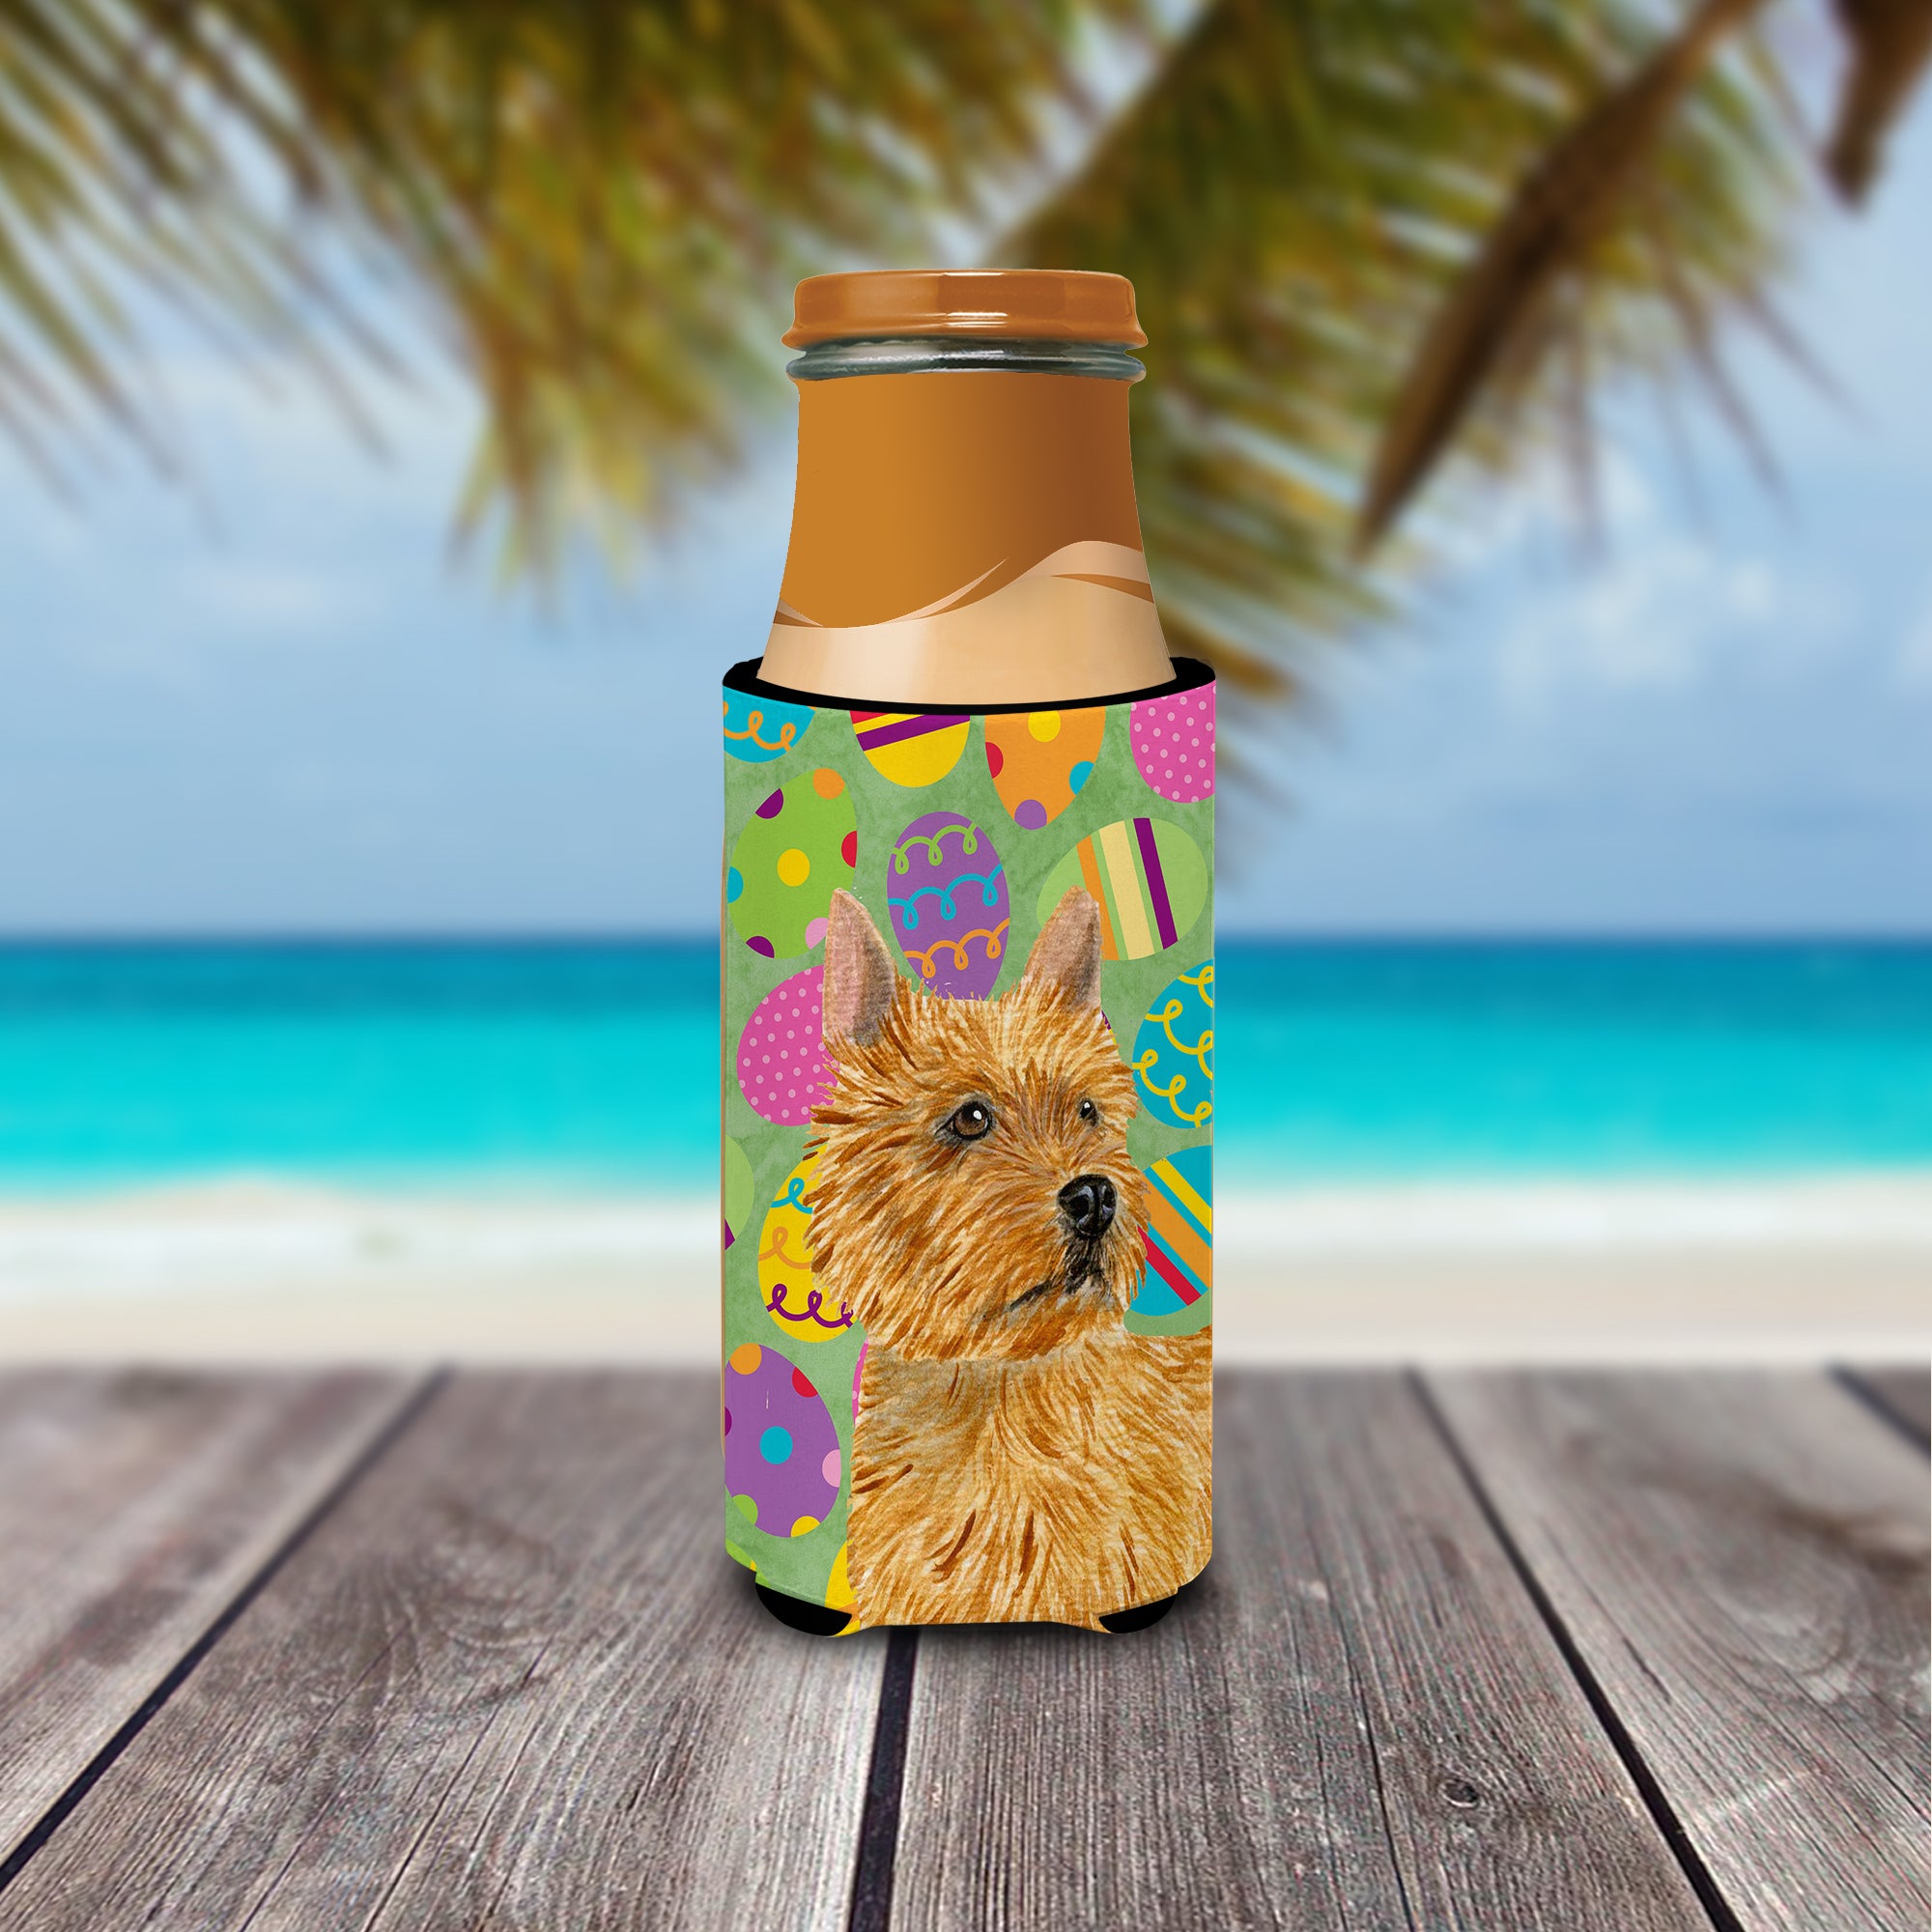 Norwich Terrier Easter Eggtravaganza Ultra Beverage Insulators for slim cans SS4844MUK.